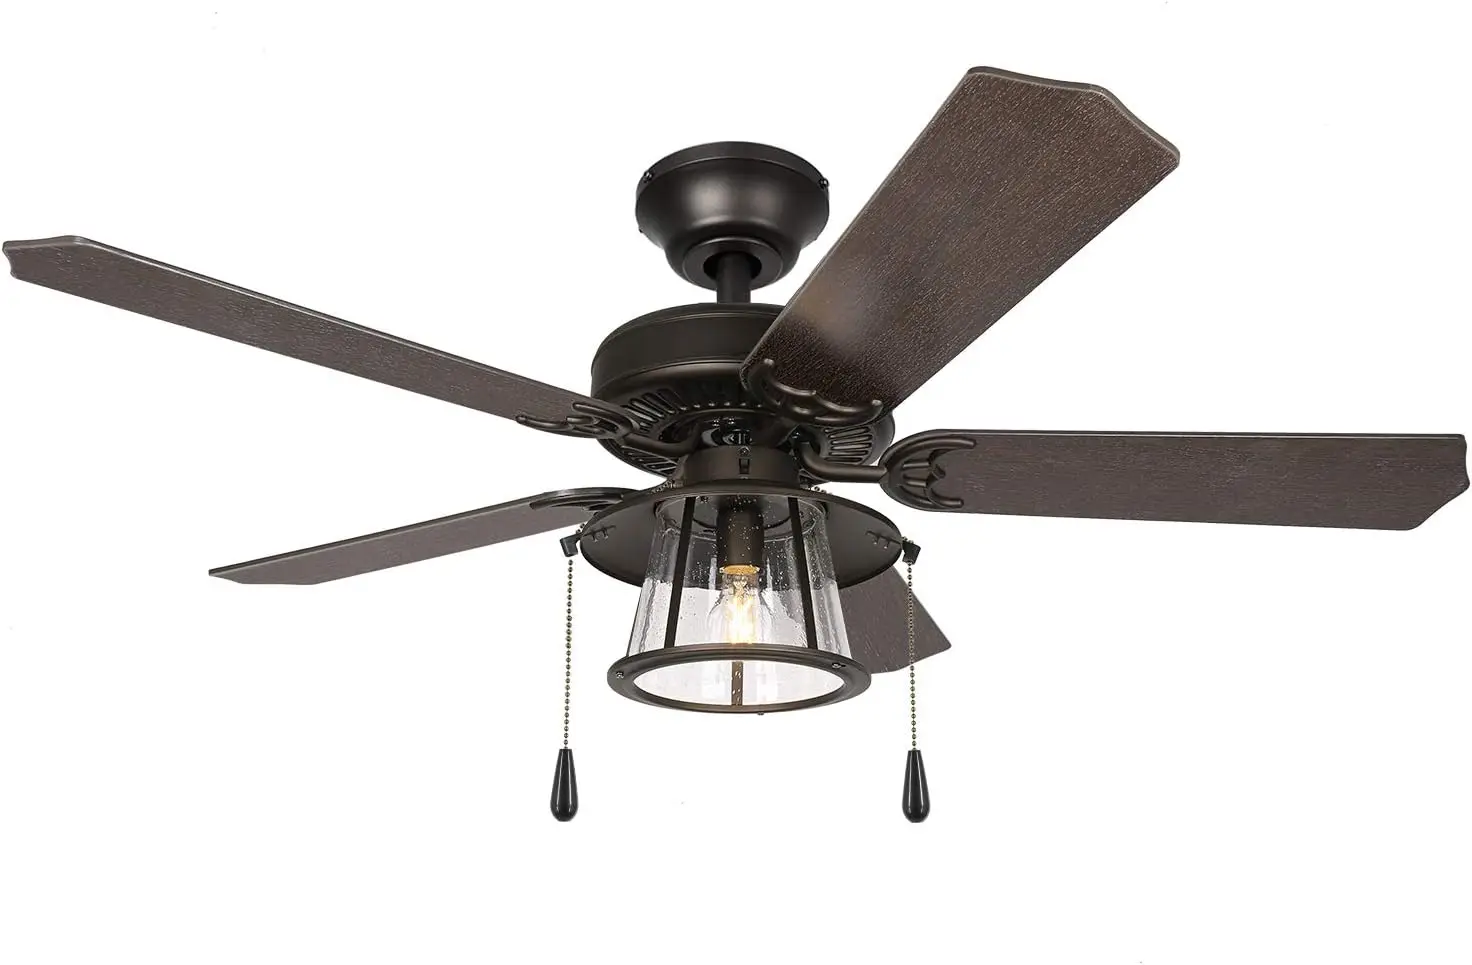 

Inch Traditional Style Ceiling Fan with Light Kit, Pull Chain Ceiling Fan with Lighting, Reversible Blades and Motor for Living